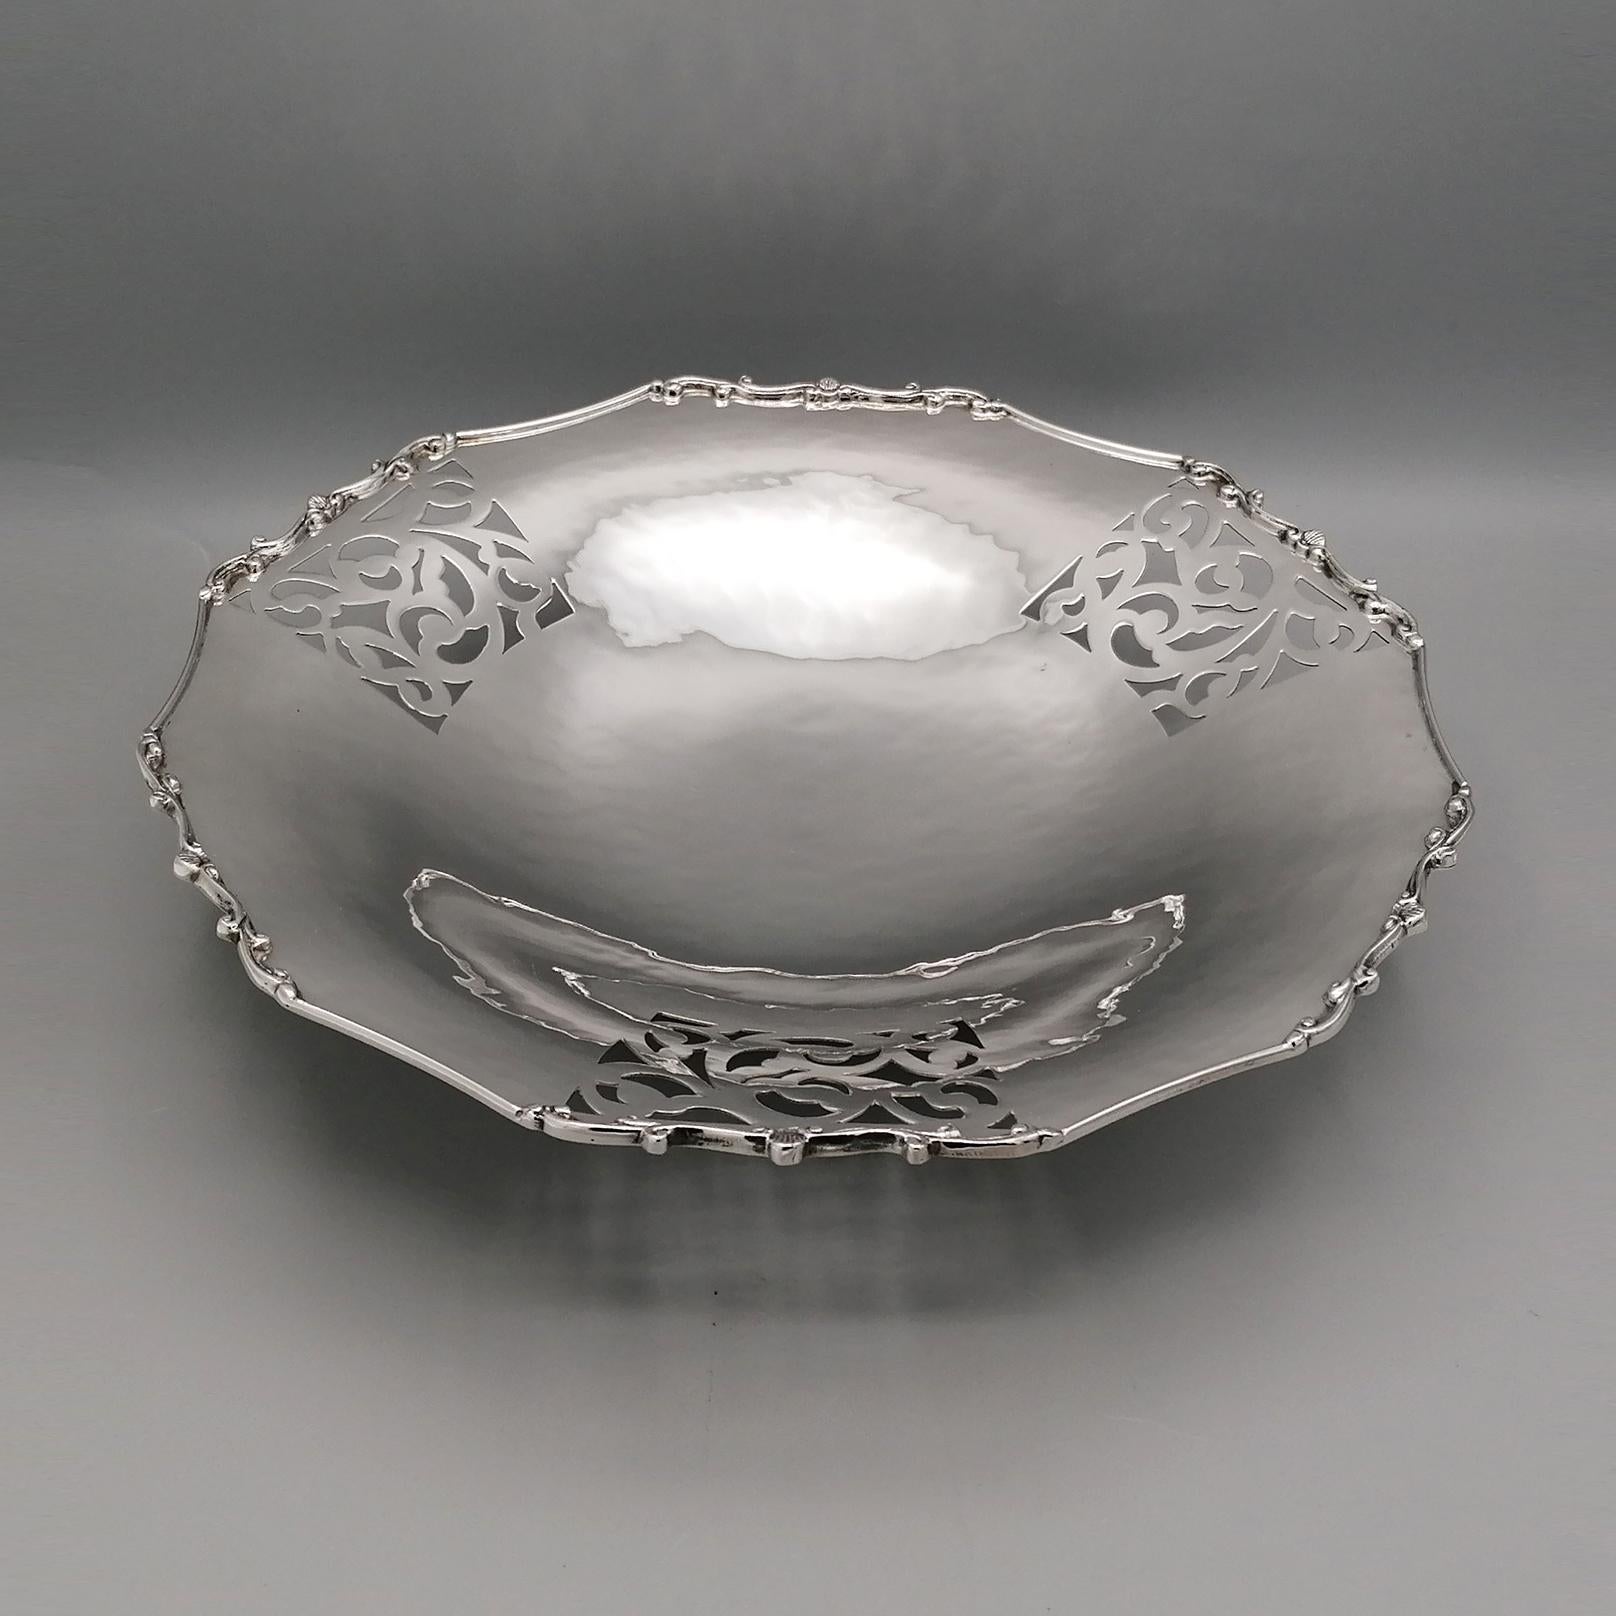 Italian Solid Silver Centerpiece Baroque revival style on feet For Sale 9